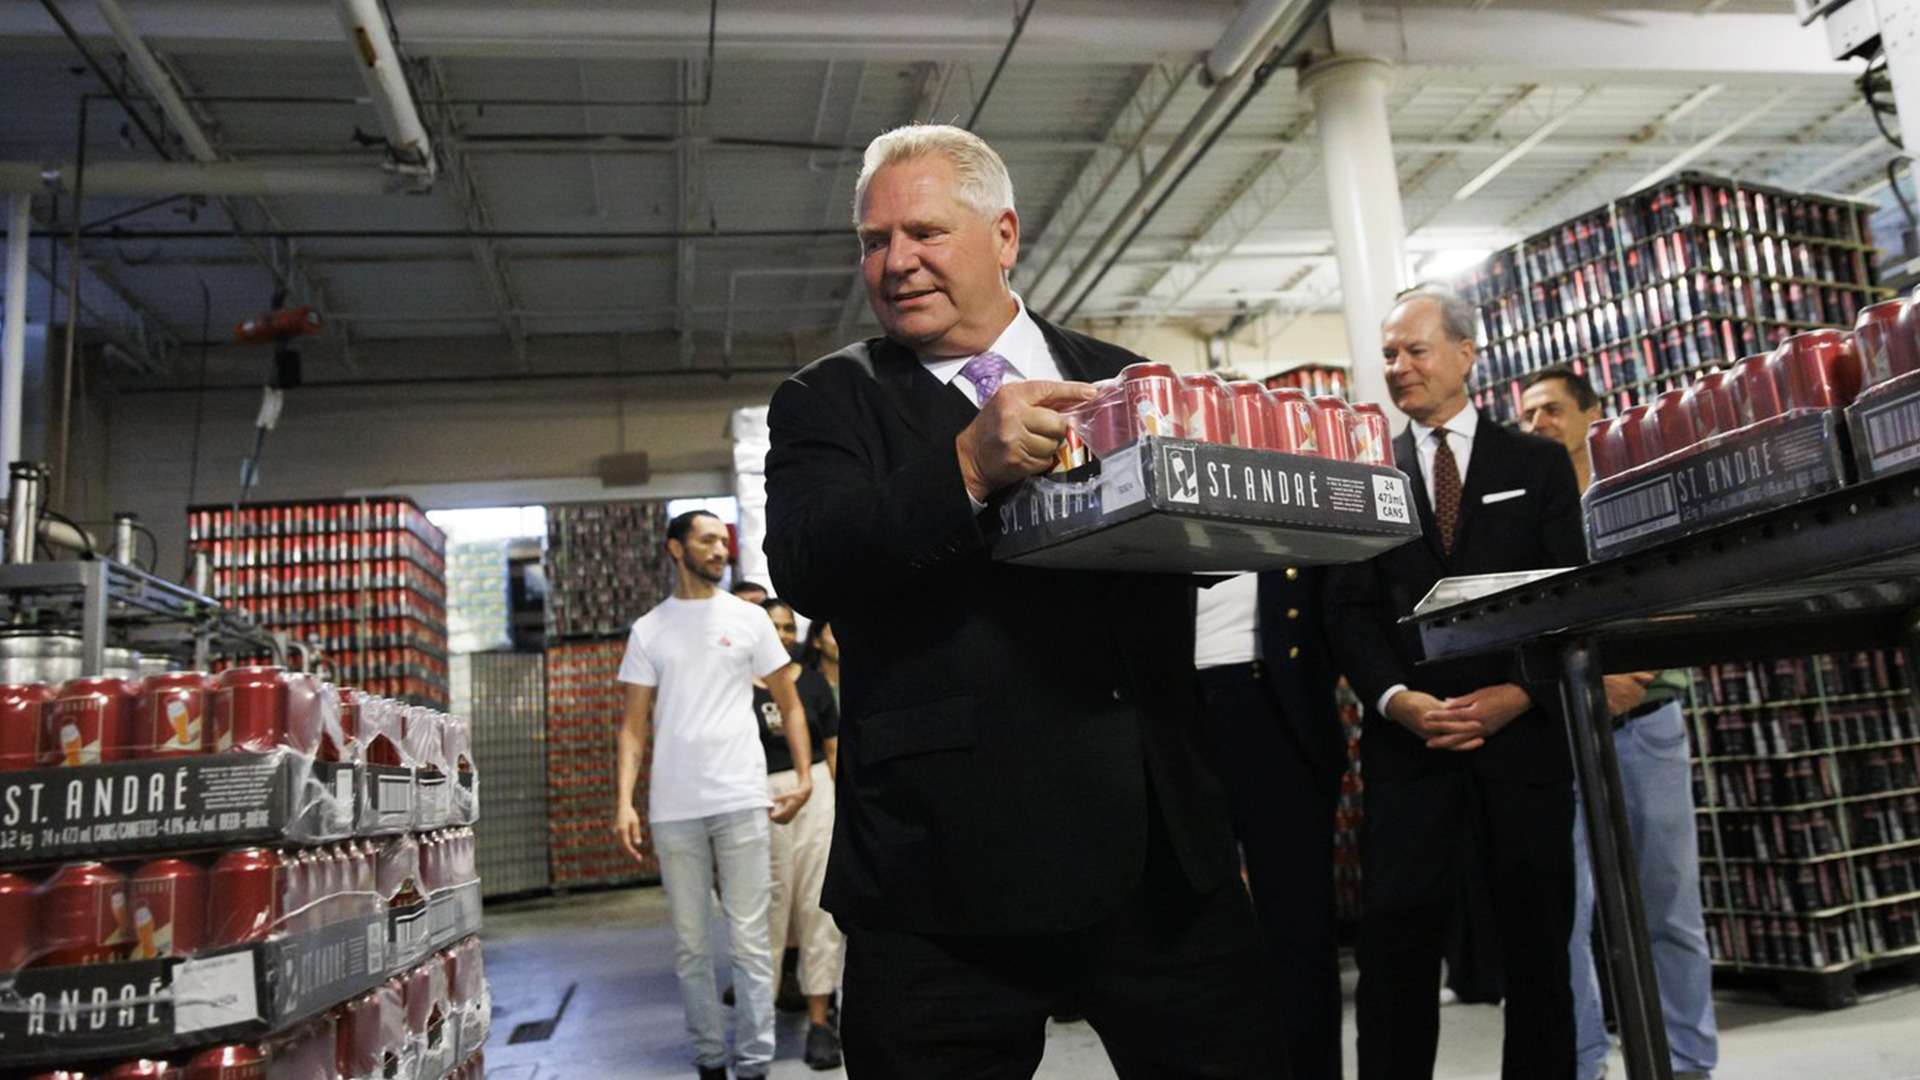 Doug Ford addresses LCBO strike and has strong words for workers' union